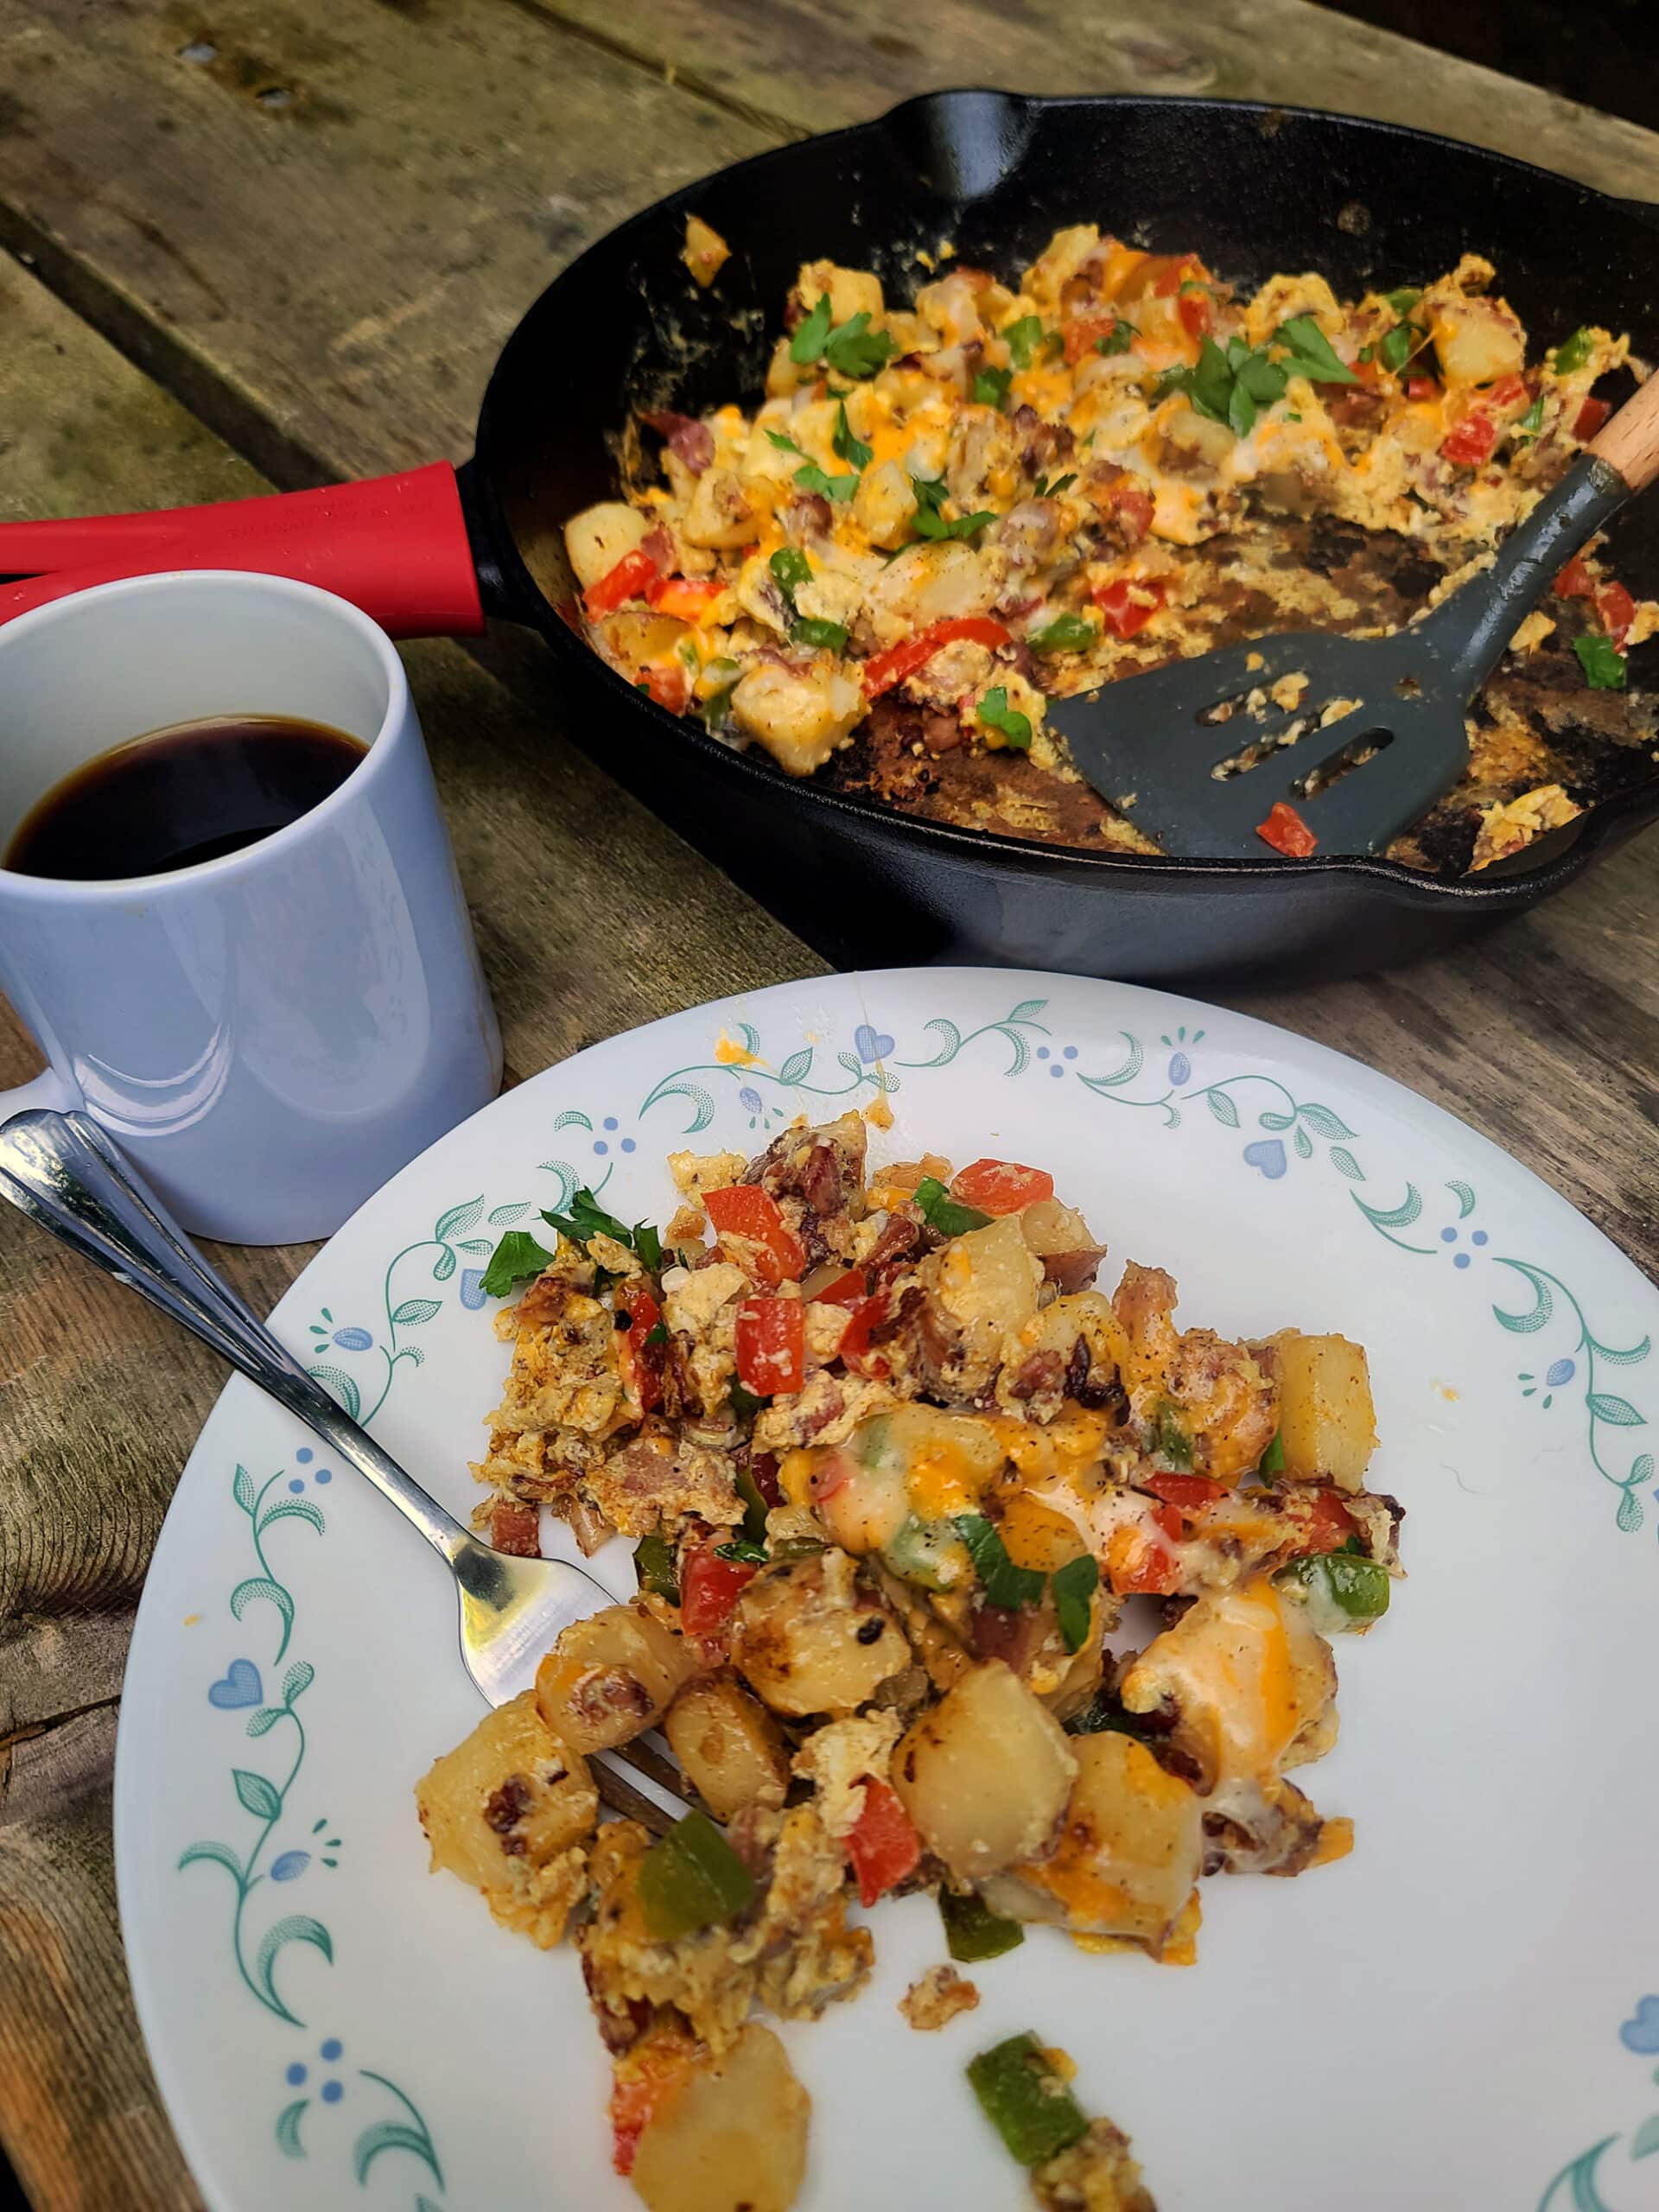 A plate of camping breakfast skillet in front of the cast iron pan, all laid out on a wooden picnic table.